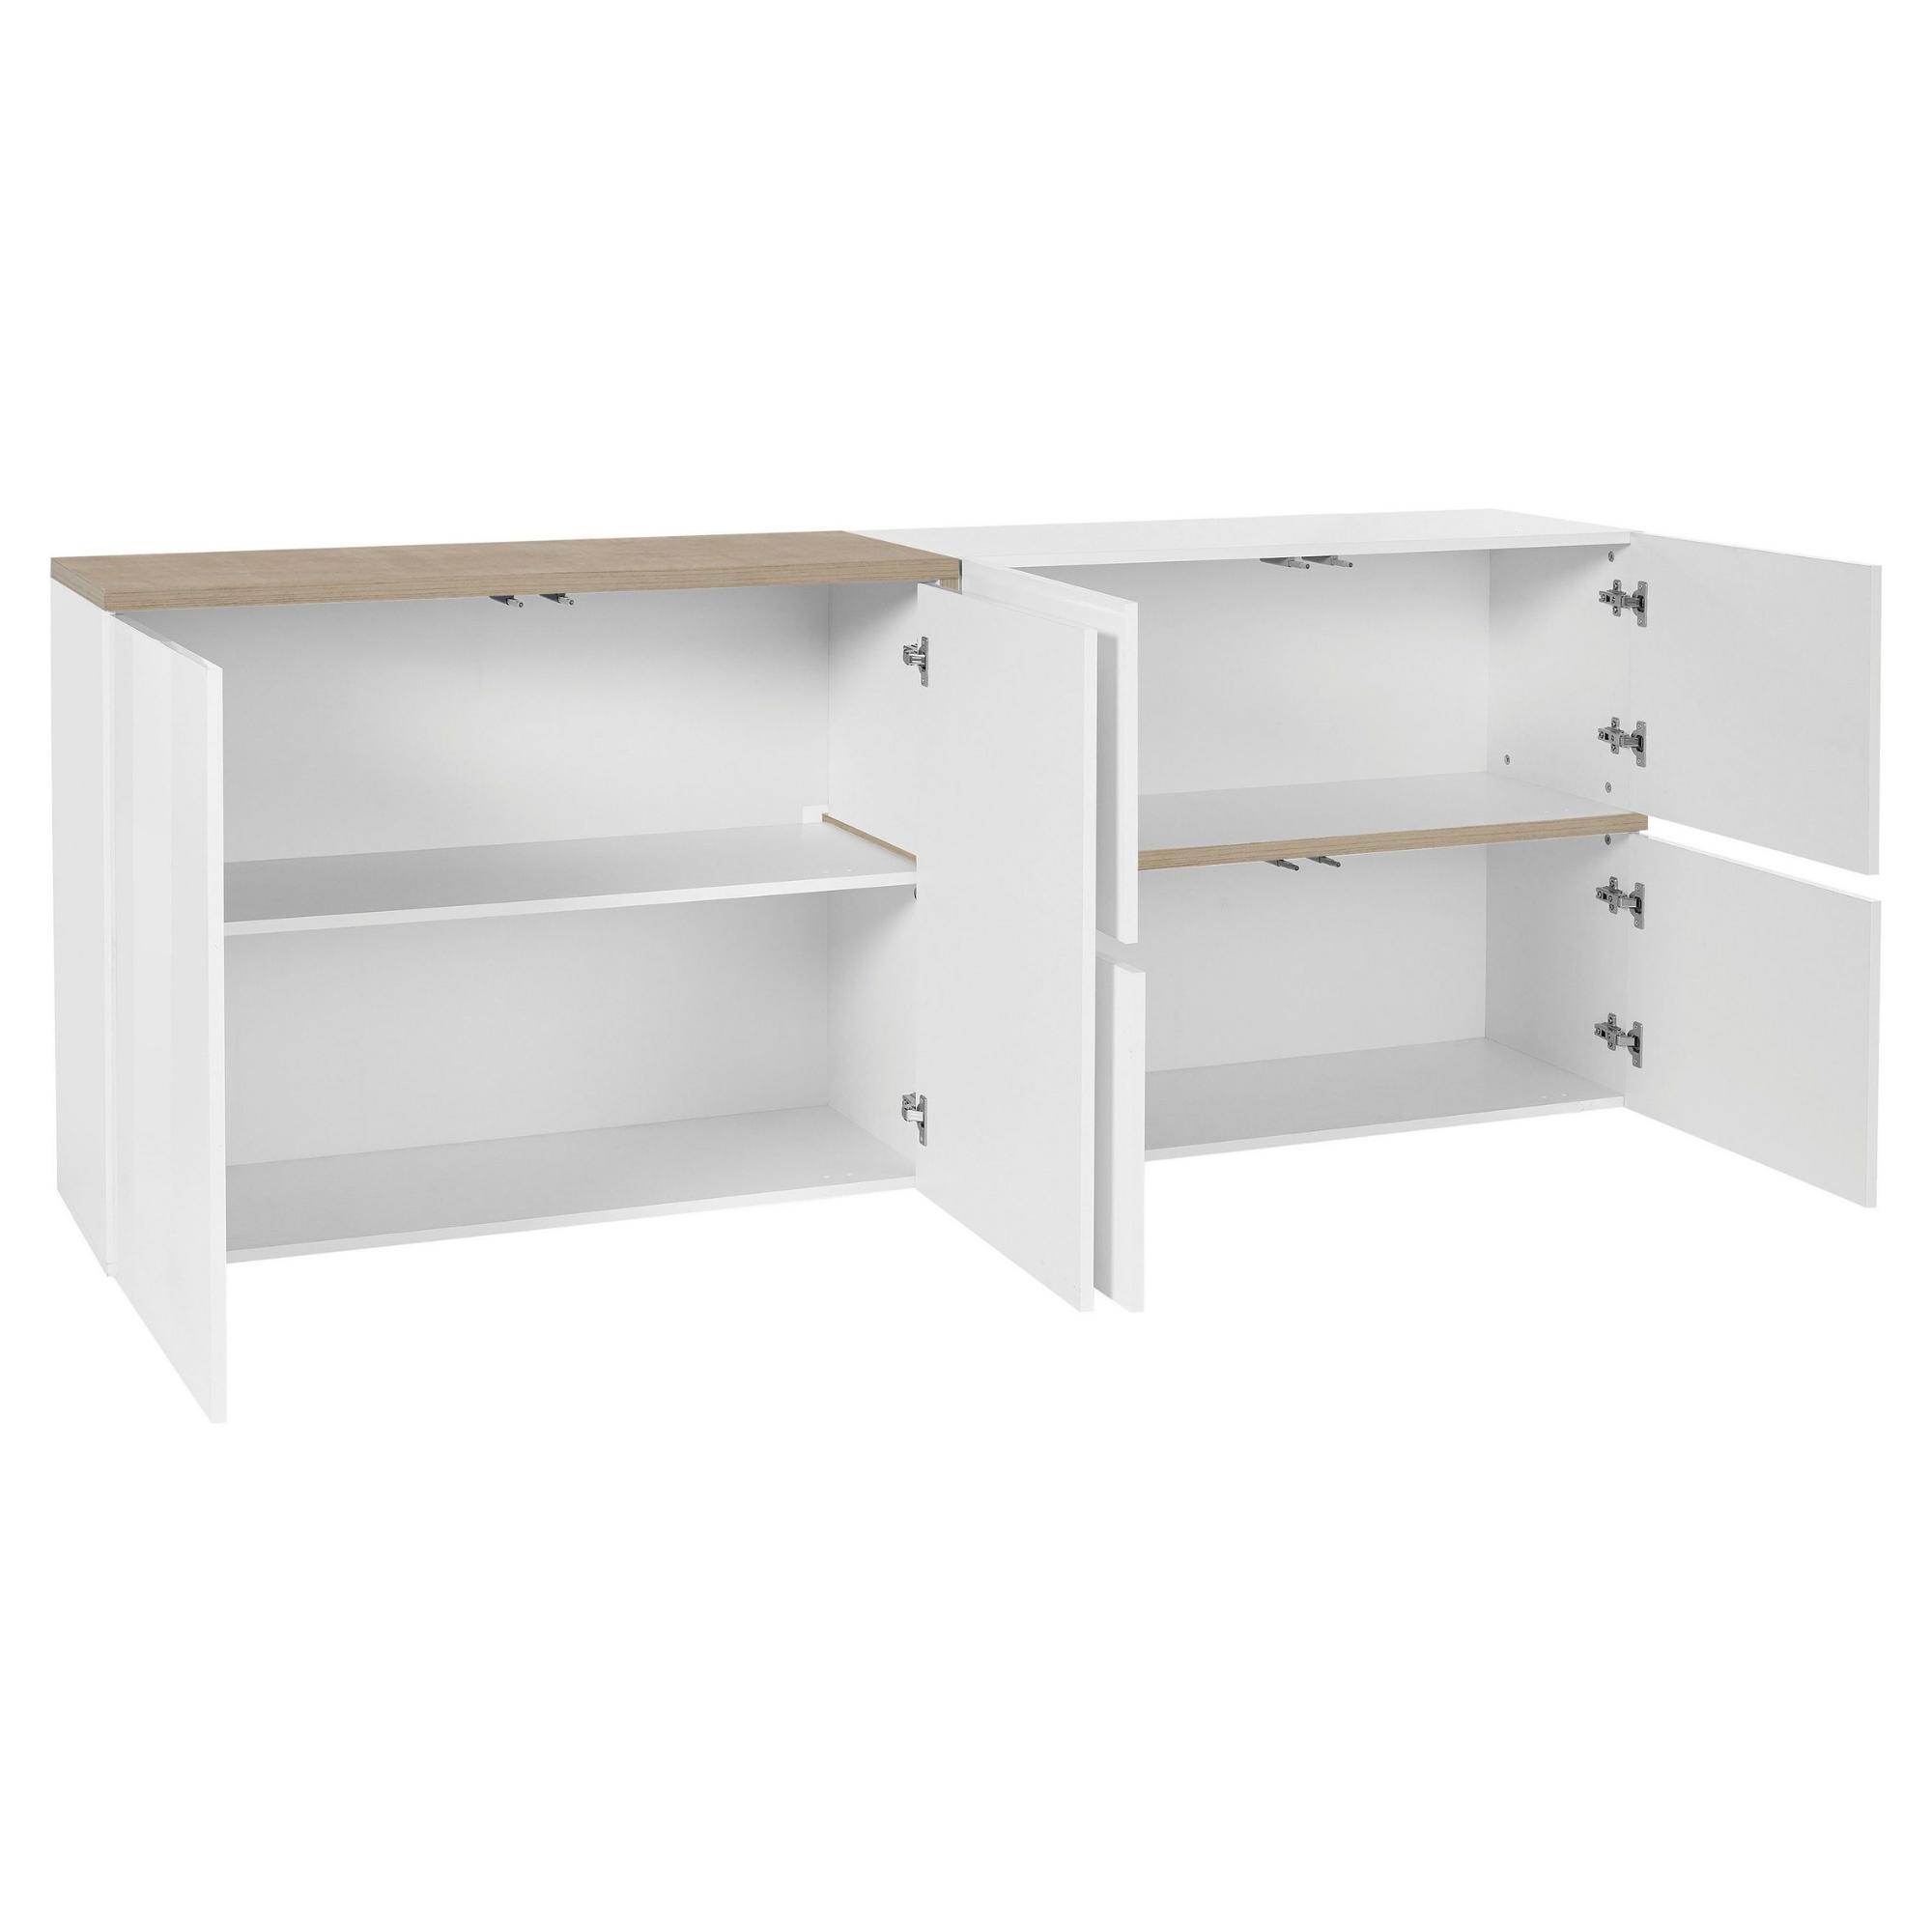 ZEN Modern High-Gloss Sideboard with Push-to-Open Doors - Furniture.Agency